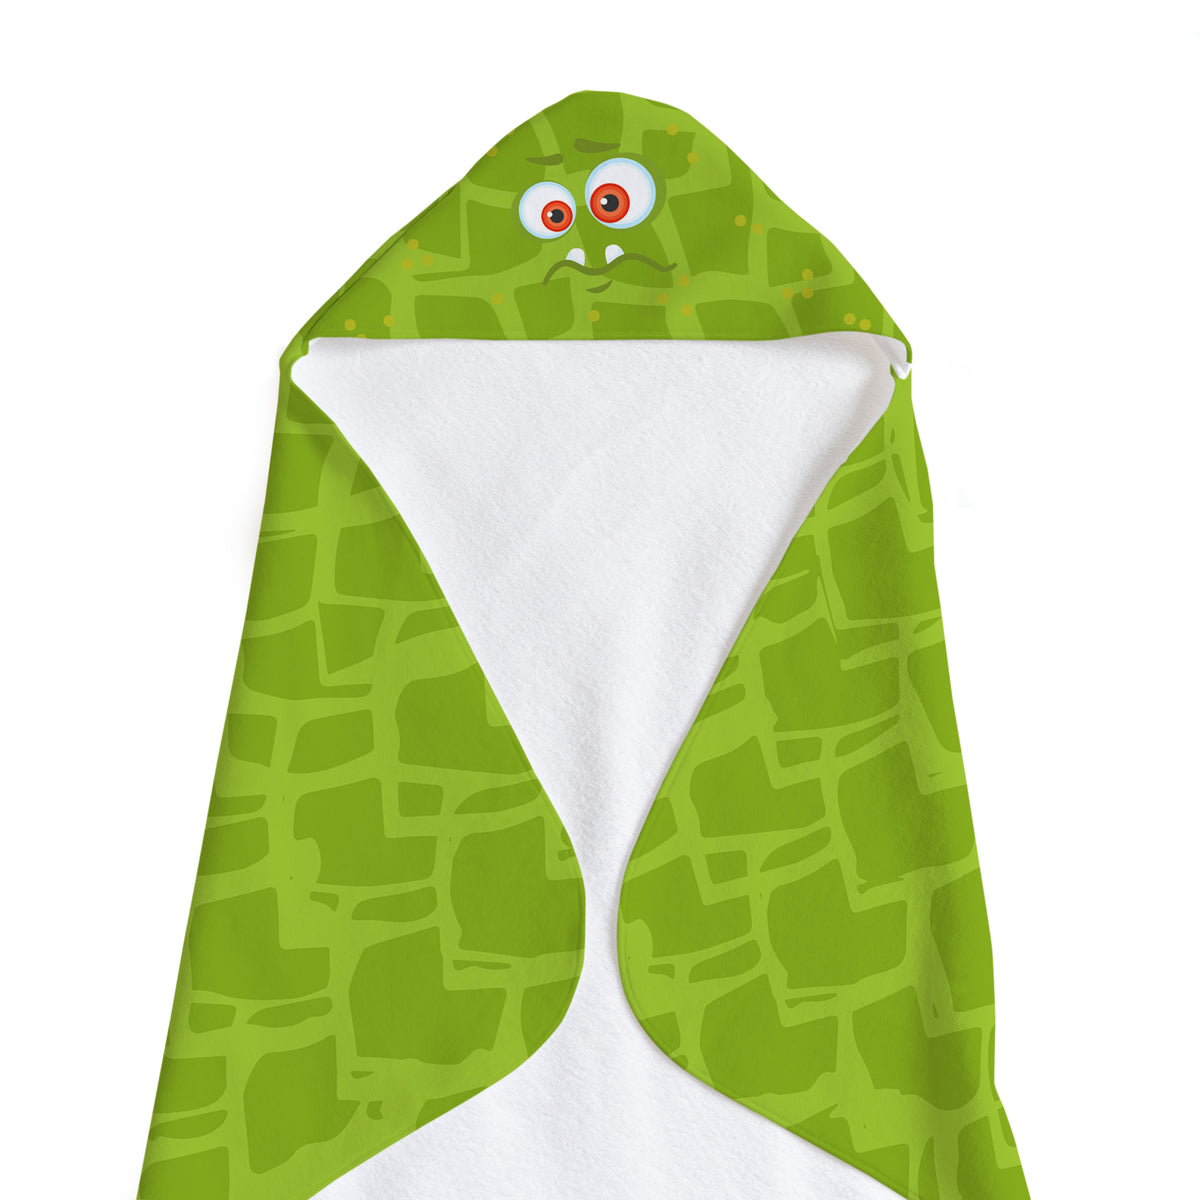 Buy this Green Monster Soft and Absorbent Hooded Baby Towel